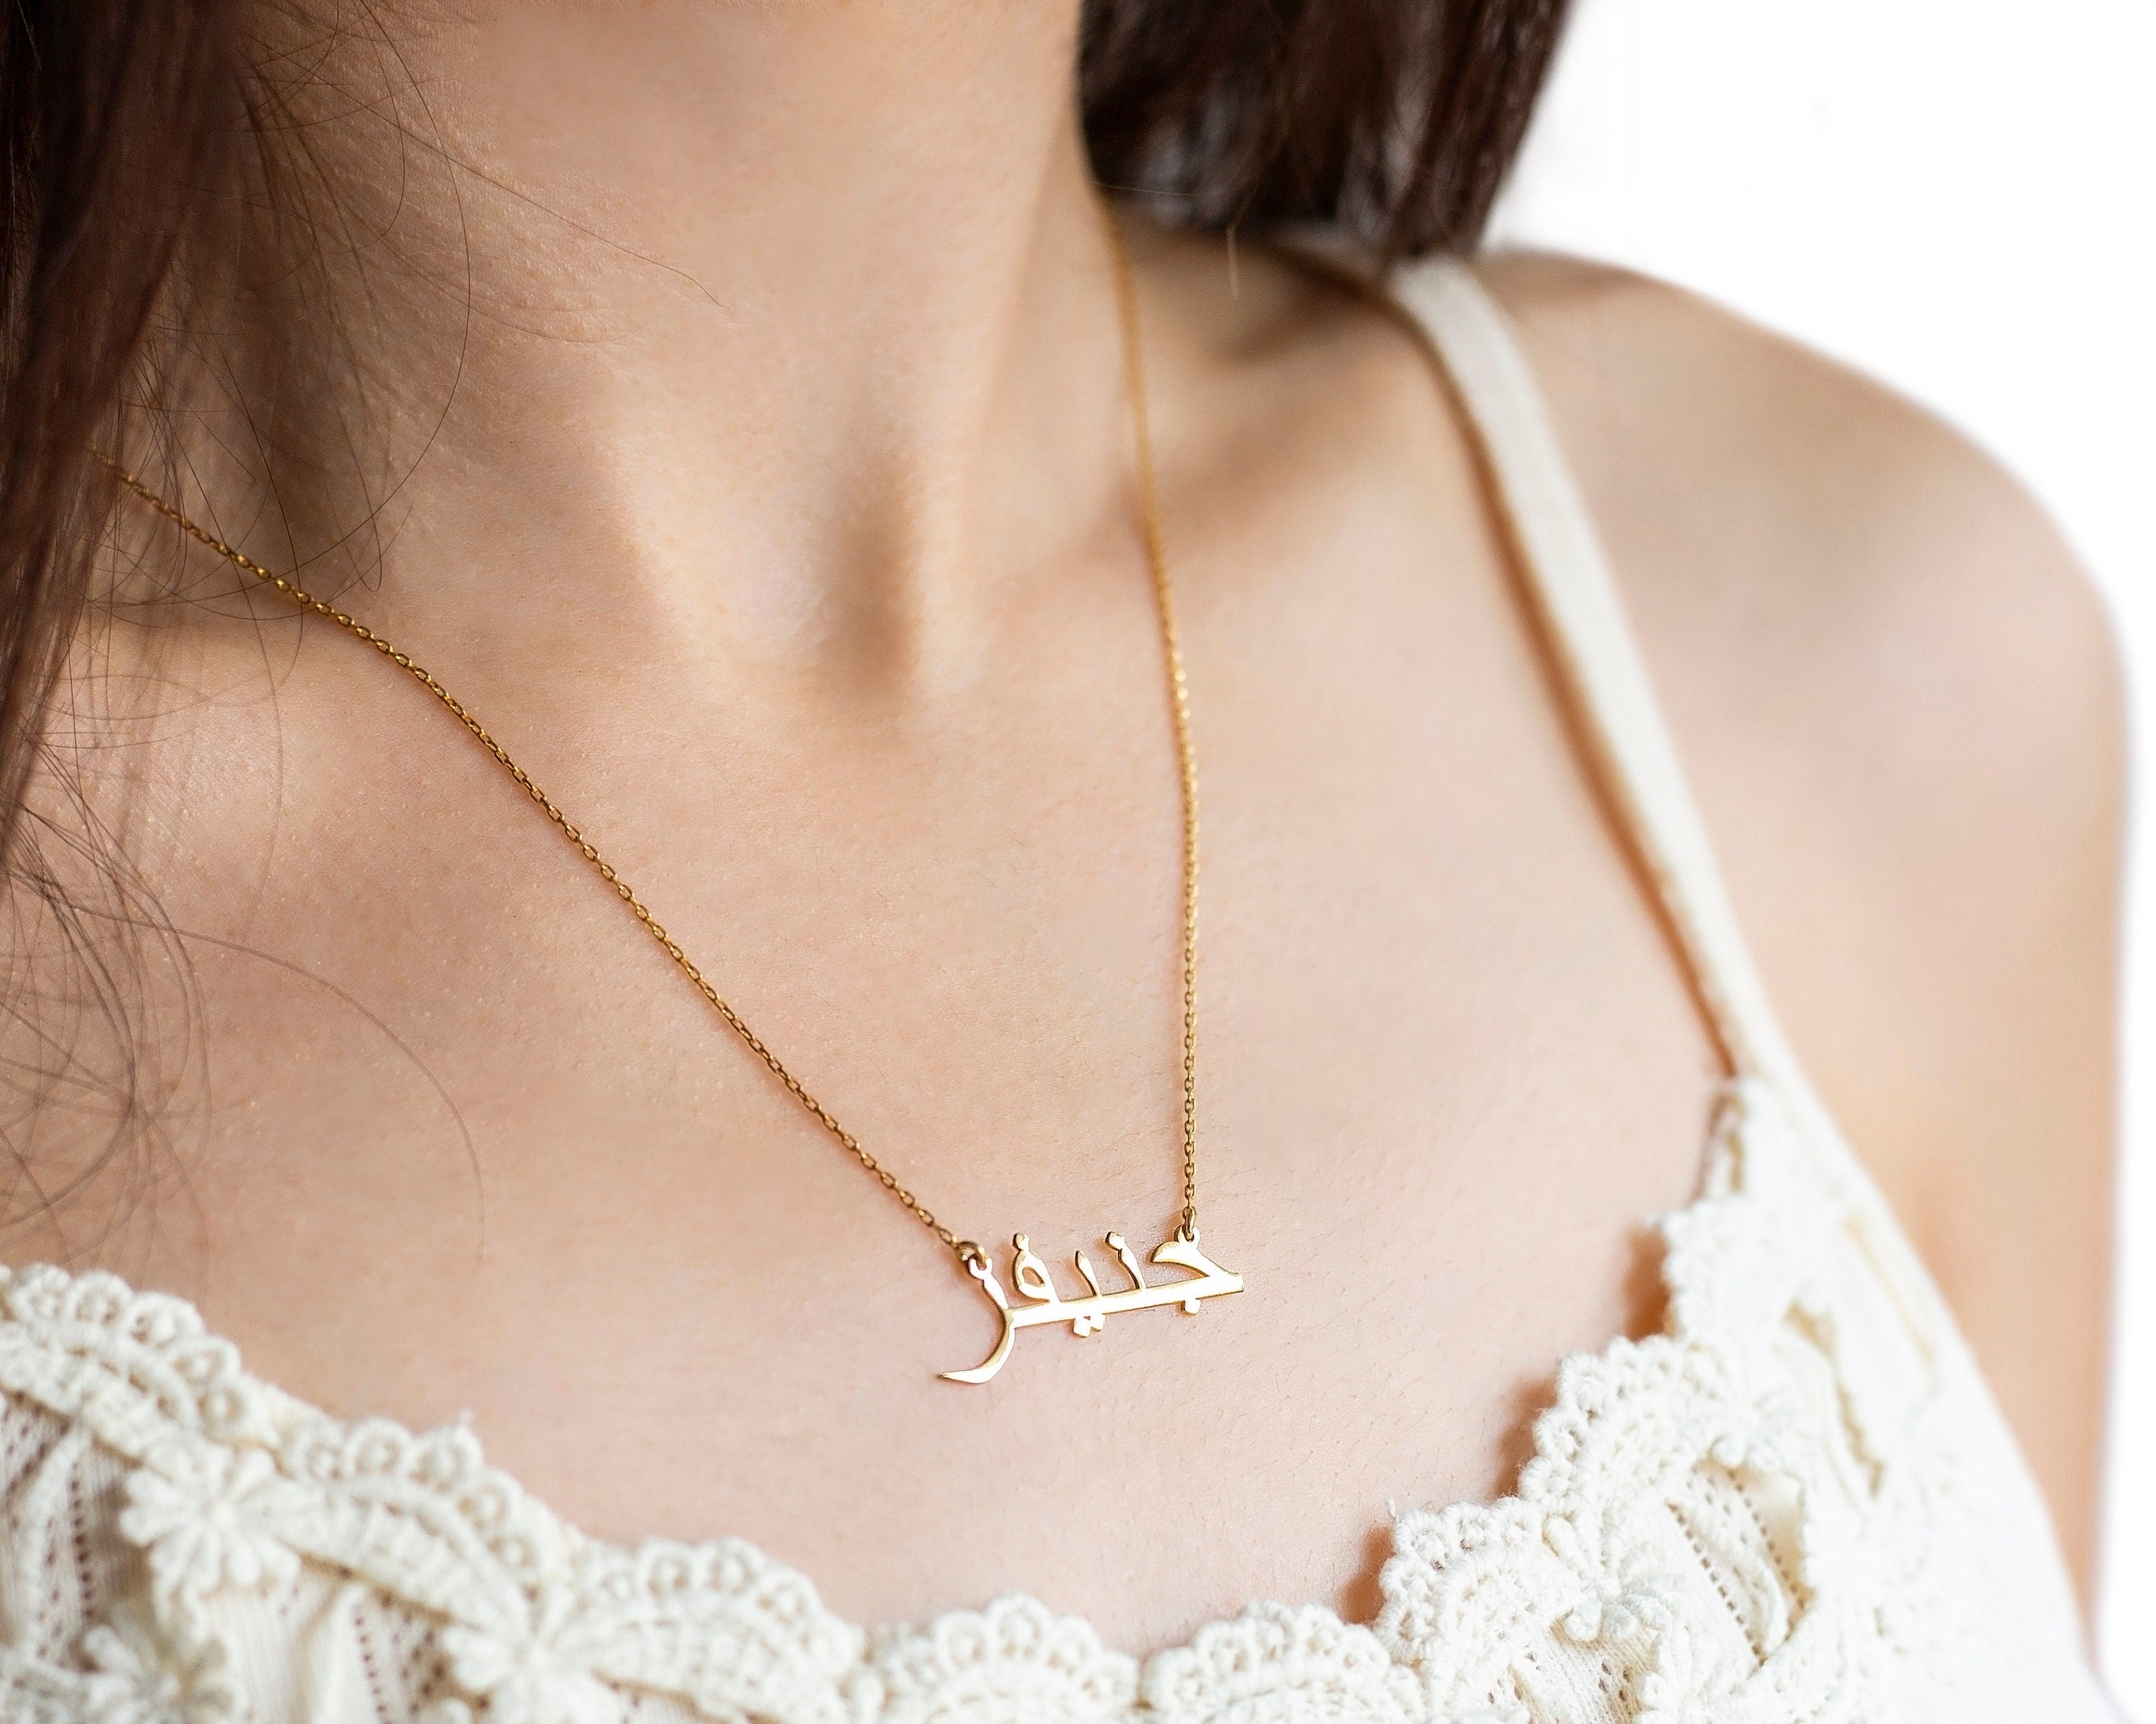 14K YELLOW GOLD ARABIC FLOATING NAME NECKLACE | Patty Q's Jewelry Inc